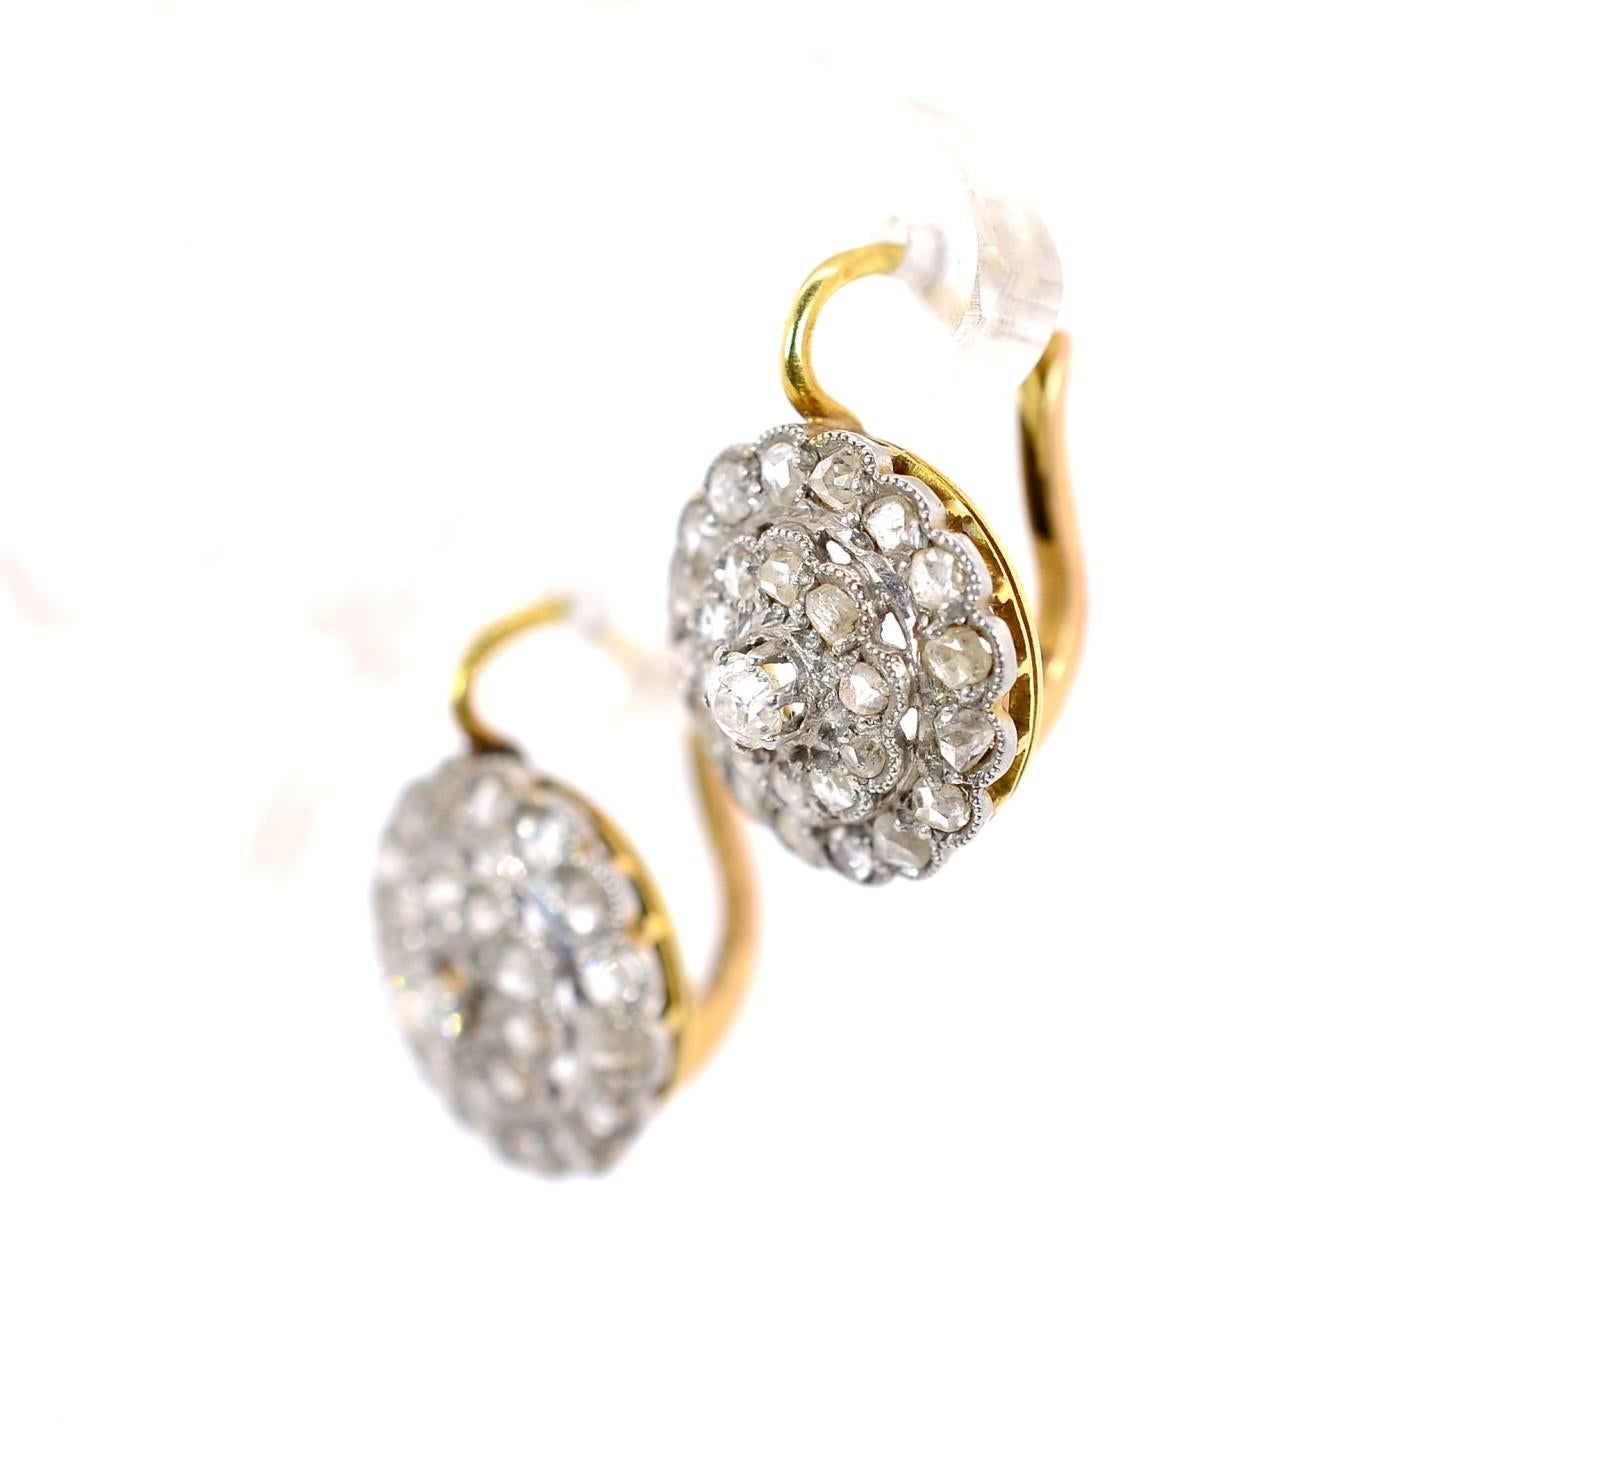 Handcrafted in the 1920s these lovely cluster earrings are a find!  The earrings are platinum-topped 18KT yellow gold,  and each centers an Old cut Diamond surrounded by sparkly Rose cut Diamonds.  The diamonds weigh a total of approx. 1.50 carat of